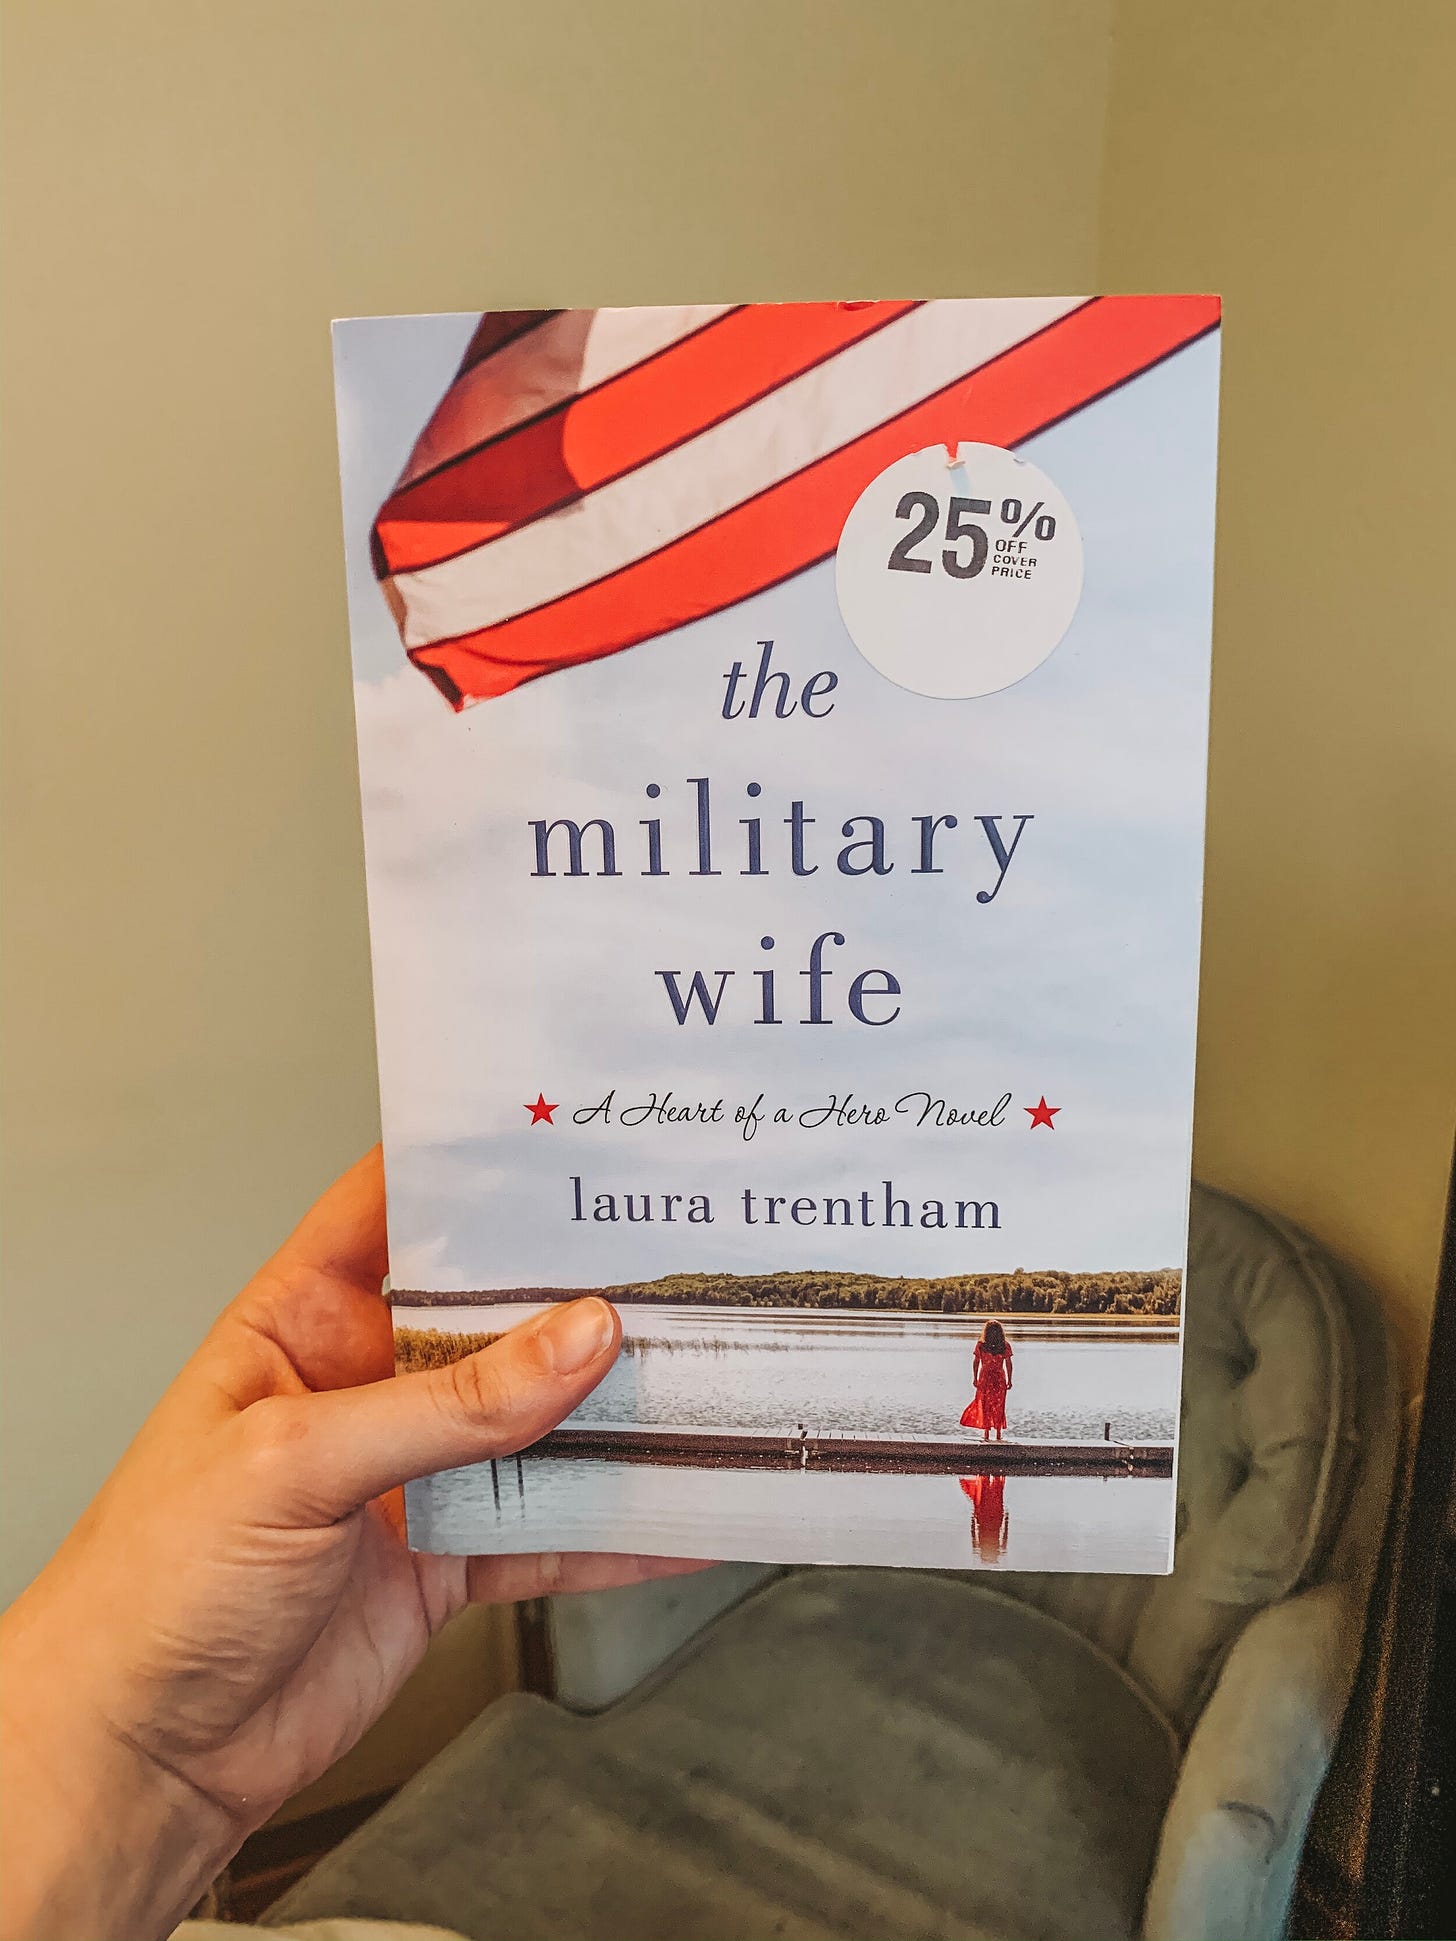 The Military Wife by Laura Trentham - Household Six Book Club Pick, January 2020